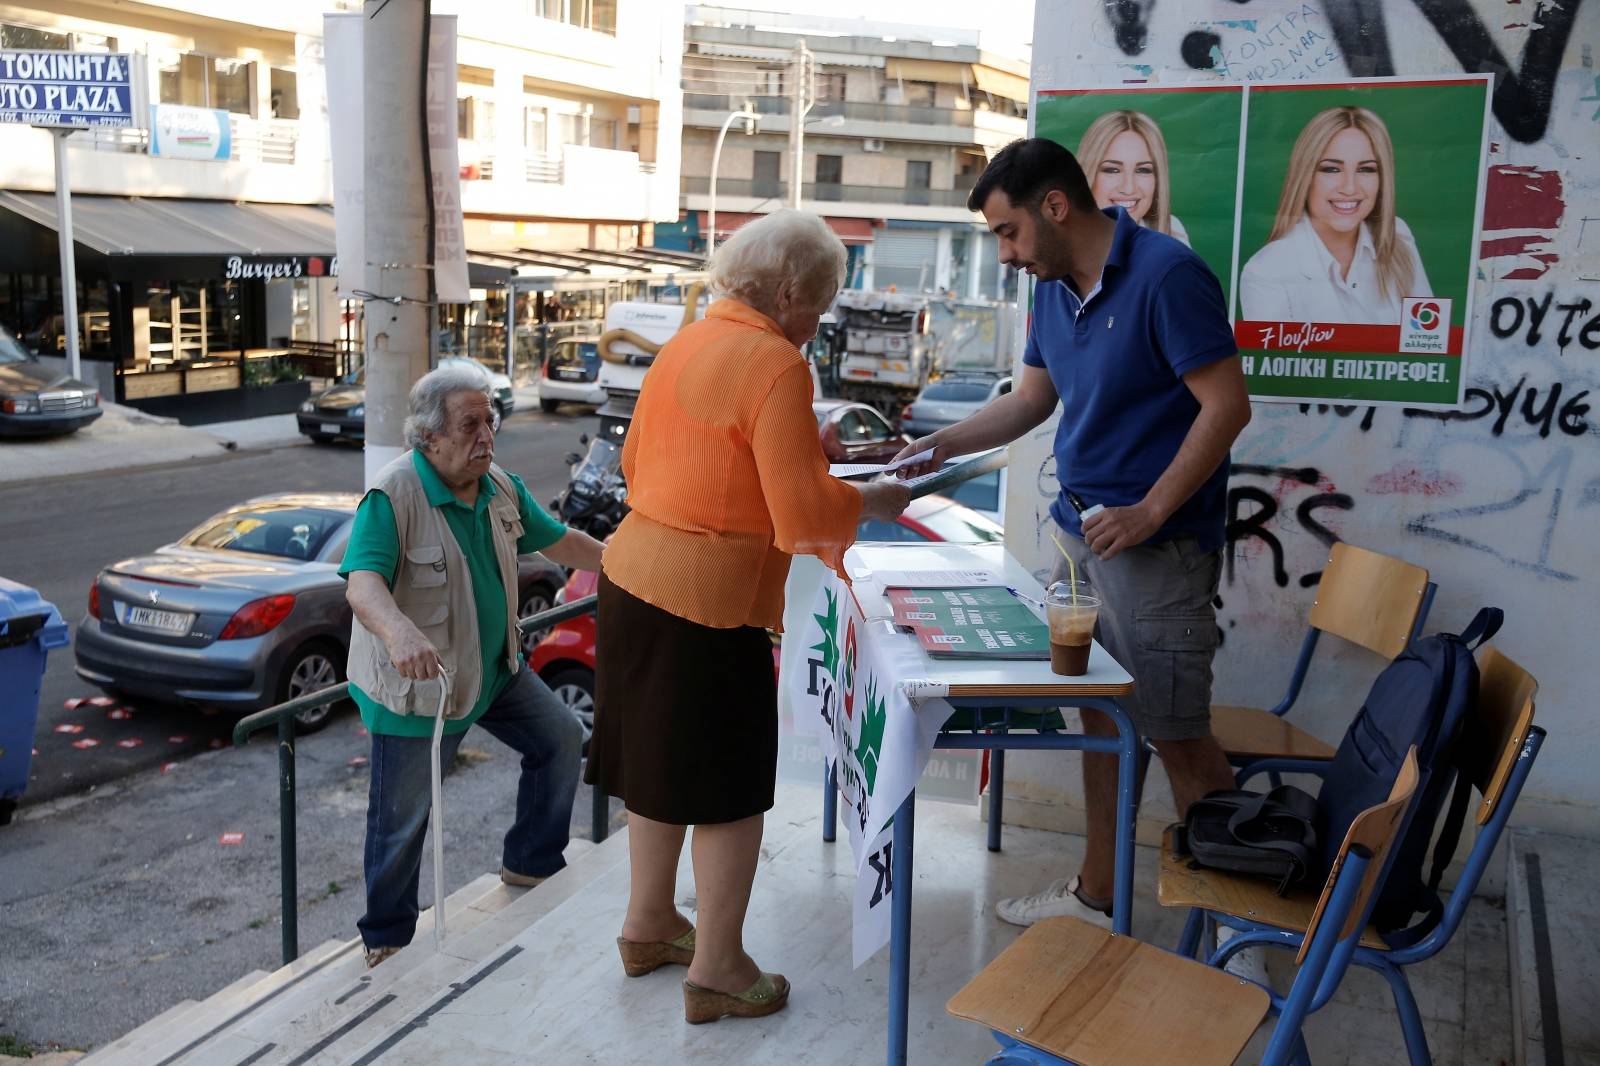 People are seen at a polling station during the general election in Athens